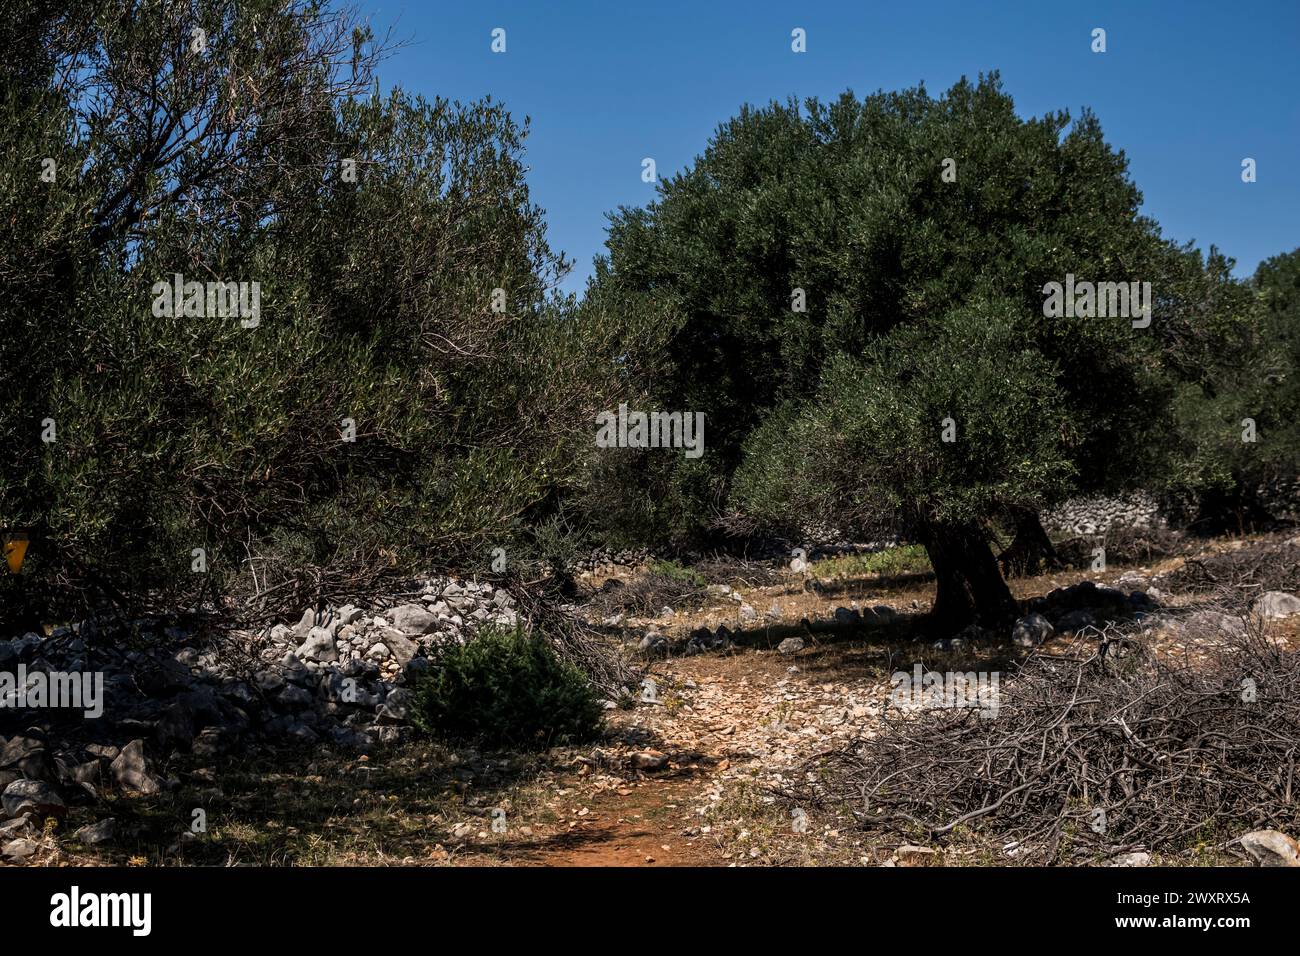 Natural landscape with old olive trees in Croatia during sunndy day in summer Stock Photo